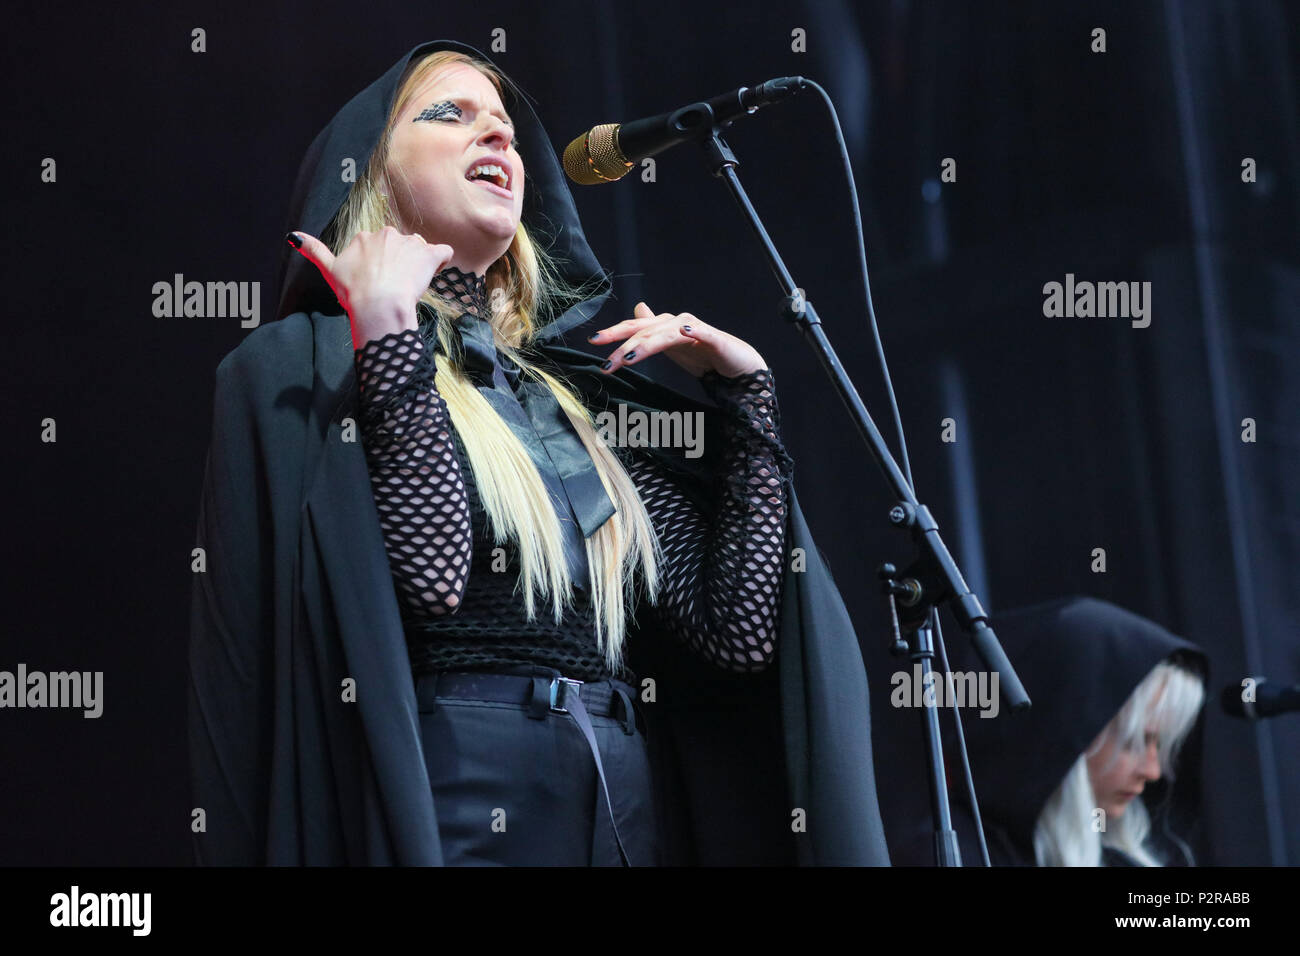 Oslo, Norway. 15th Jun, 2018. The Norwegian singer, songwriter and musician Susanne Sundfør performs a live concert during the Norwegian music festival Piknik i Parken 2018 in Oslo. (Photo credit: Gonzales Photo - Stian S. Moller). Credit: Gonzales Photo/Alamy Live News Stock Photo